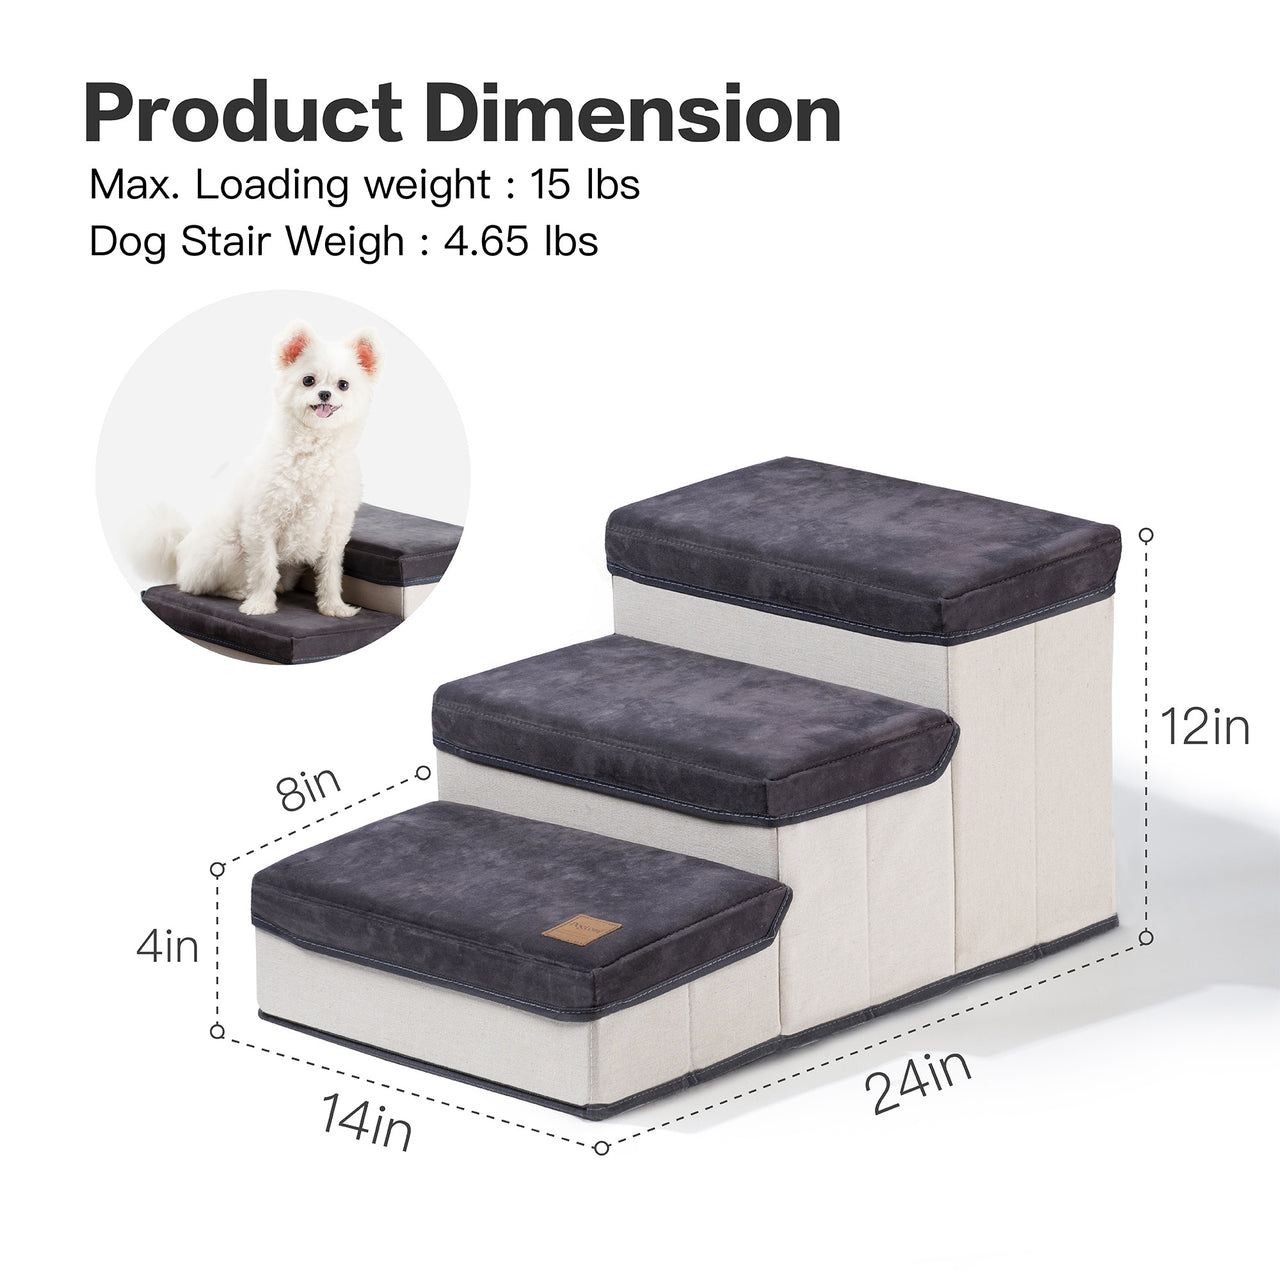 3 Tiers foldable Dog stairs